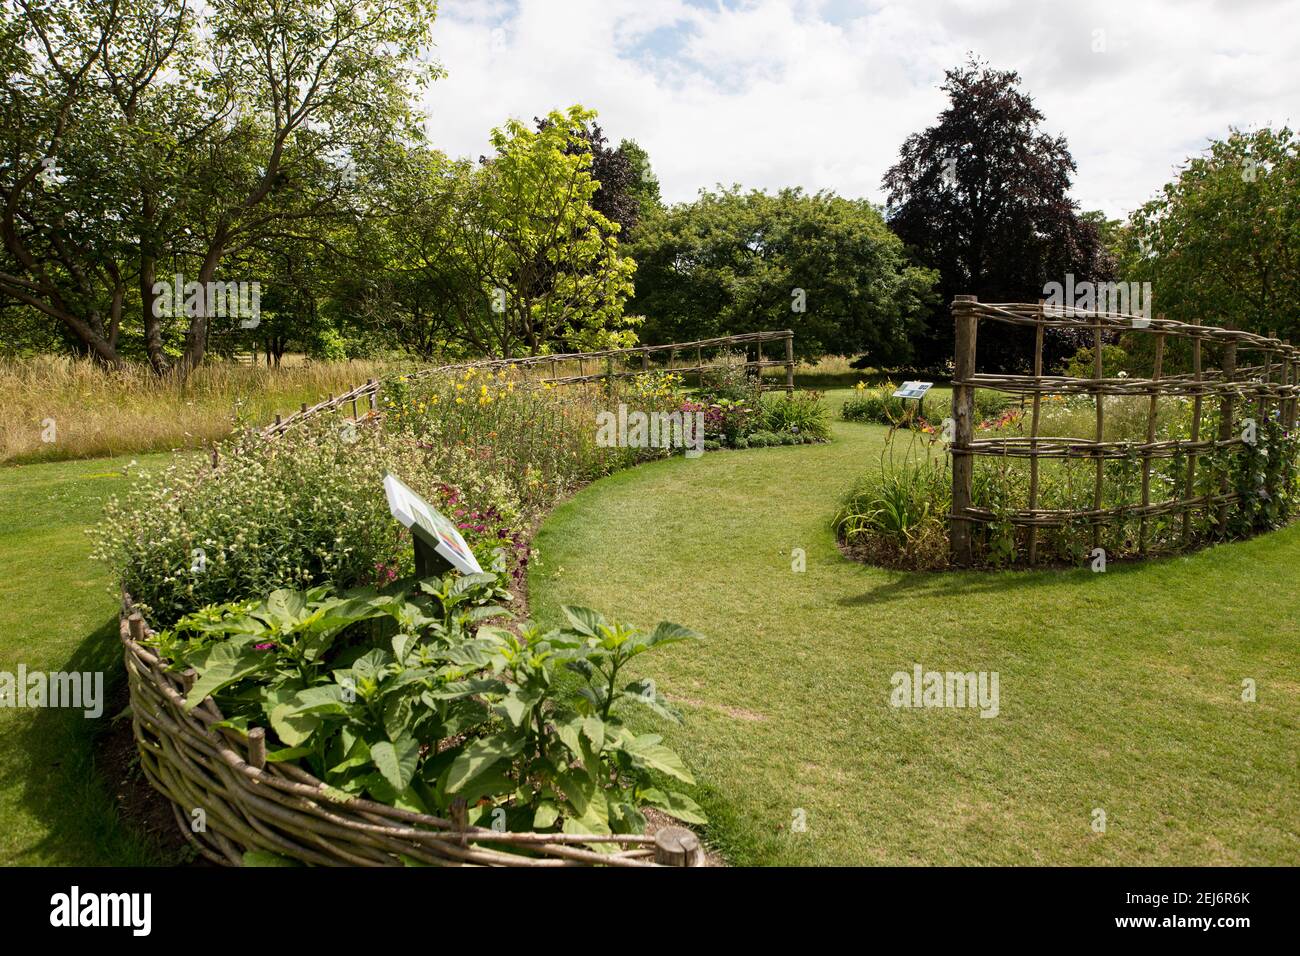 Flower beds and curved fencing in the Understanding Plants area of the Cambridge University Botanical Gardens in Cambridge, England, United Kingdom. Stock Photo